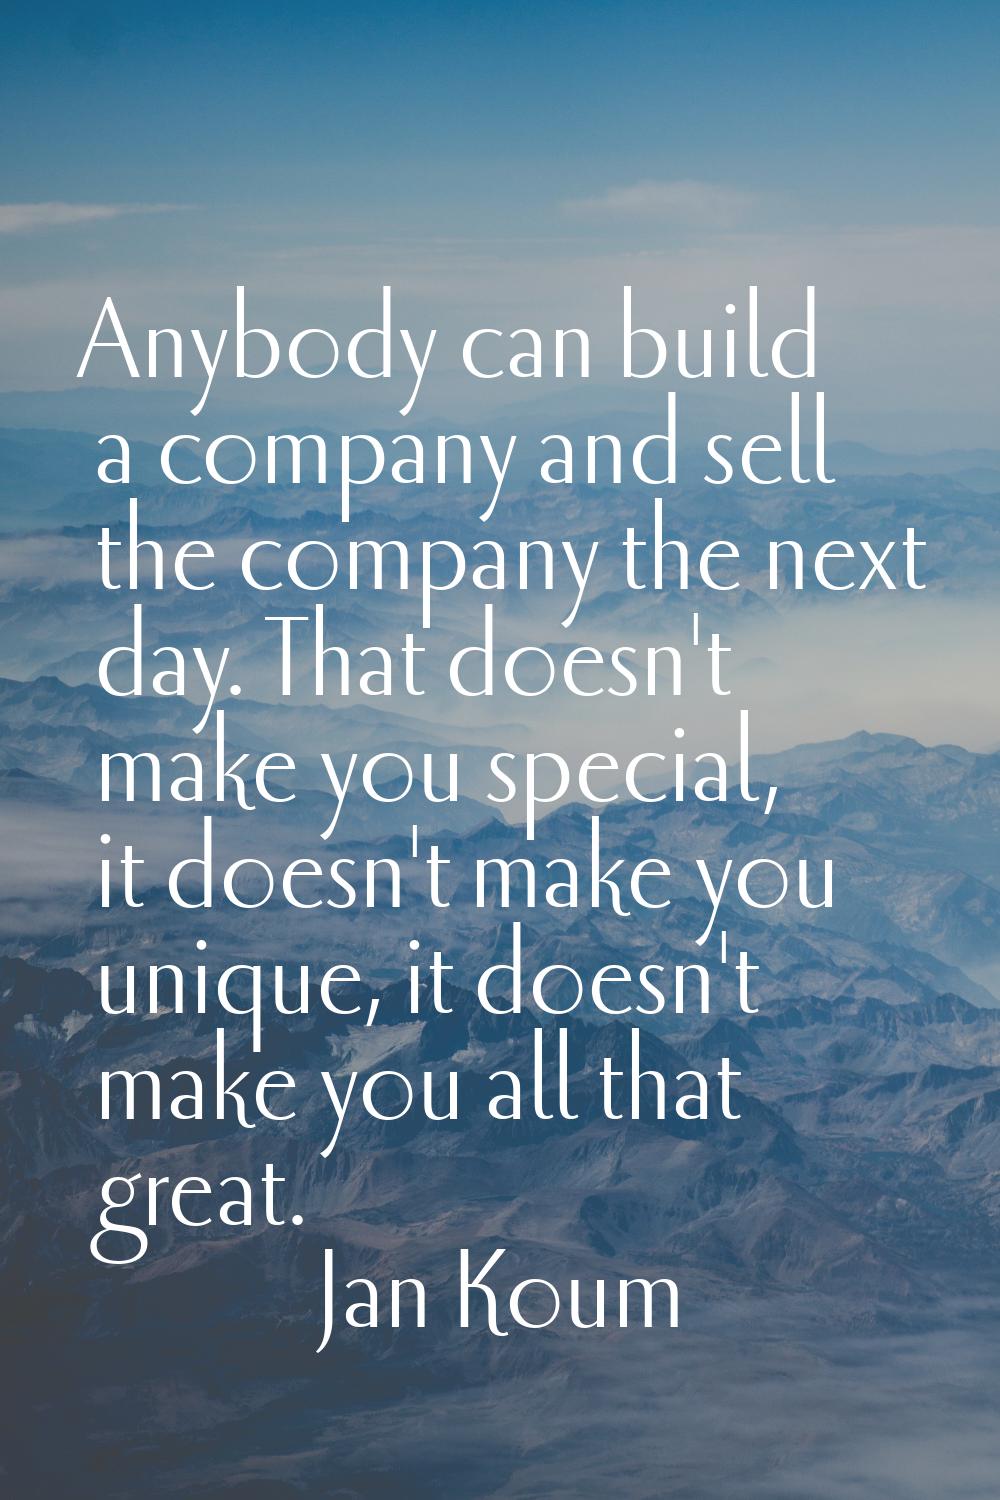 Anybody can build a company and sell the company the next day. That doesn't make you special, it do